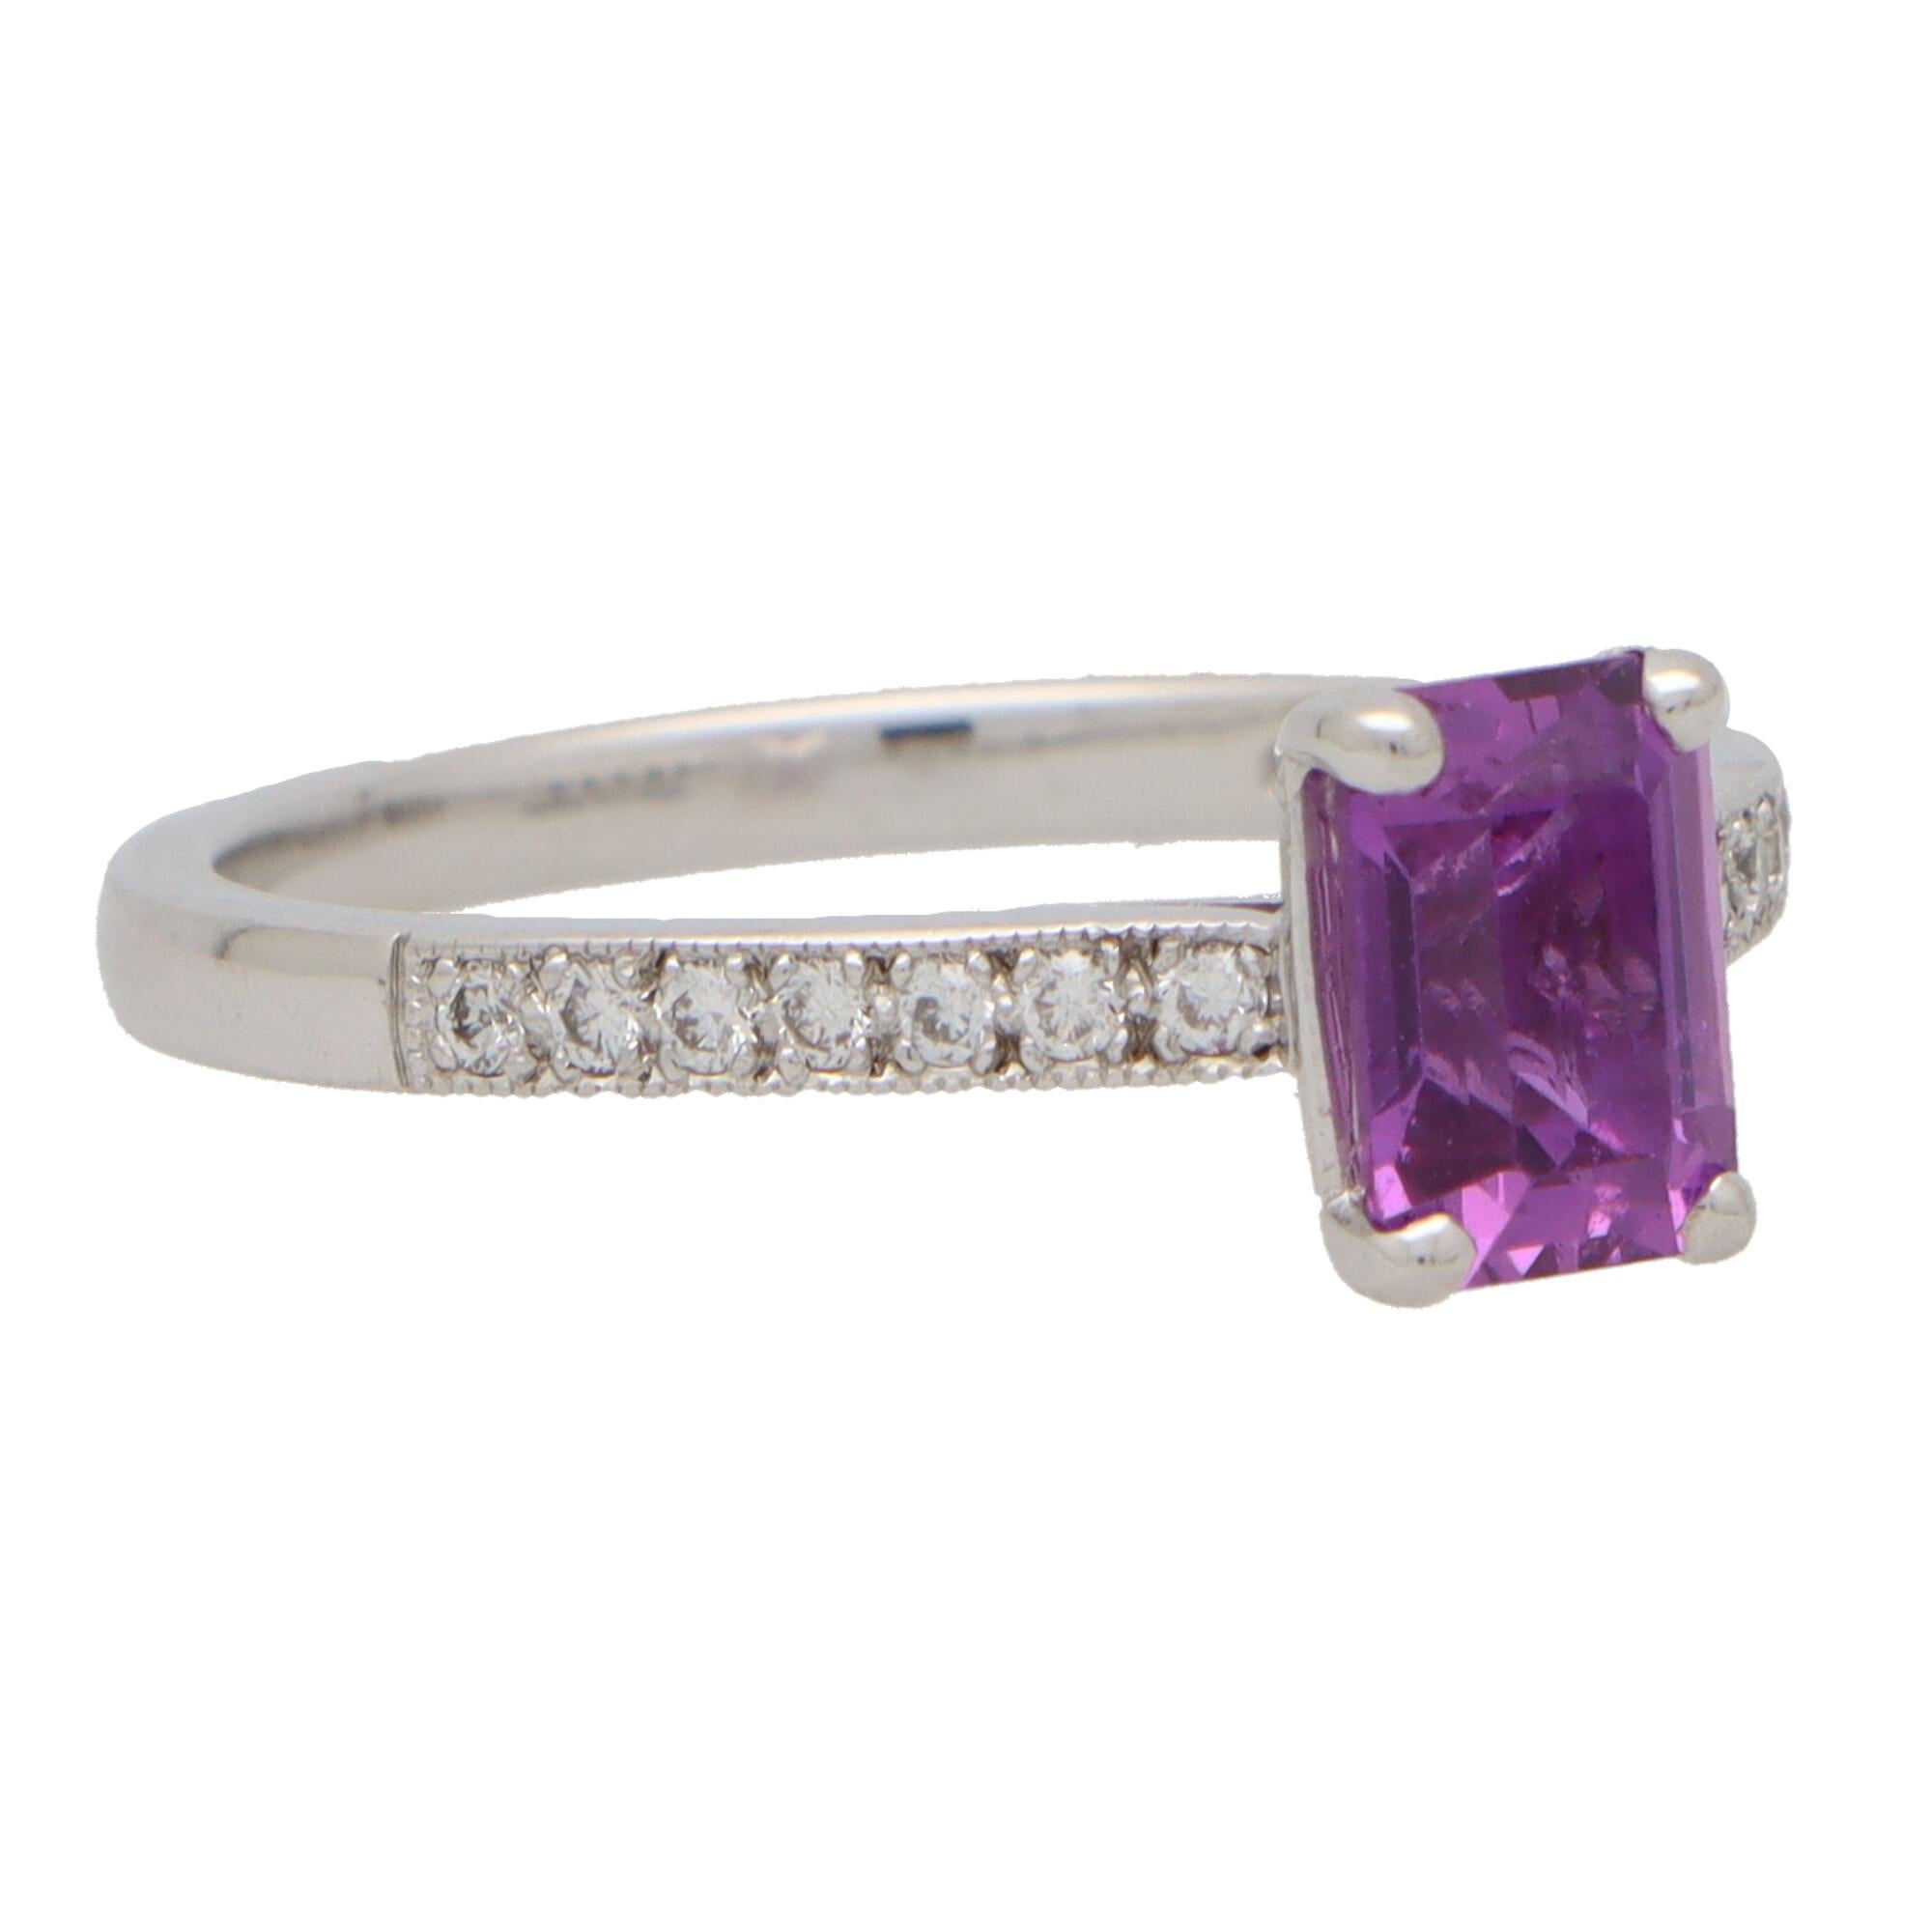 An extremely elegant purple sapphire and diamond solitaire ring set in 18k white gold. 

The piece features a beautiful purple coloured 1.29 carat emerald cut sapphire. The sapphire is four claw set to centre within a raised gallery setting with